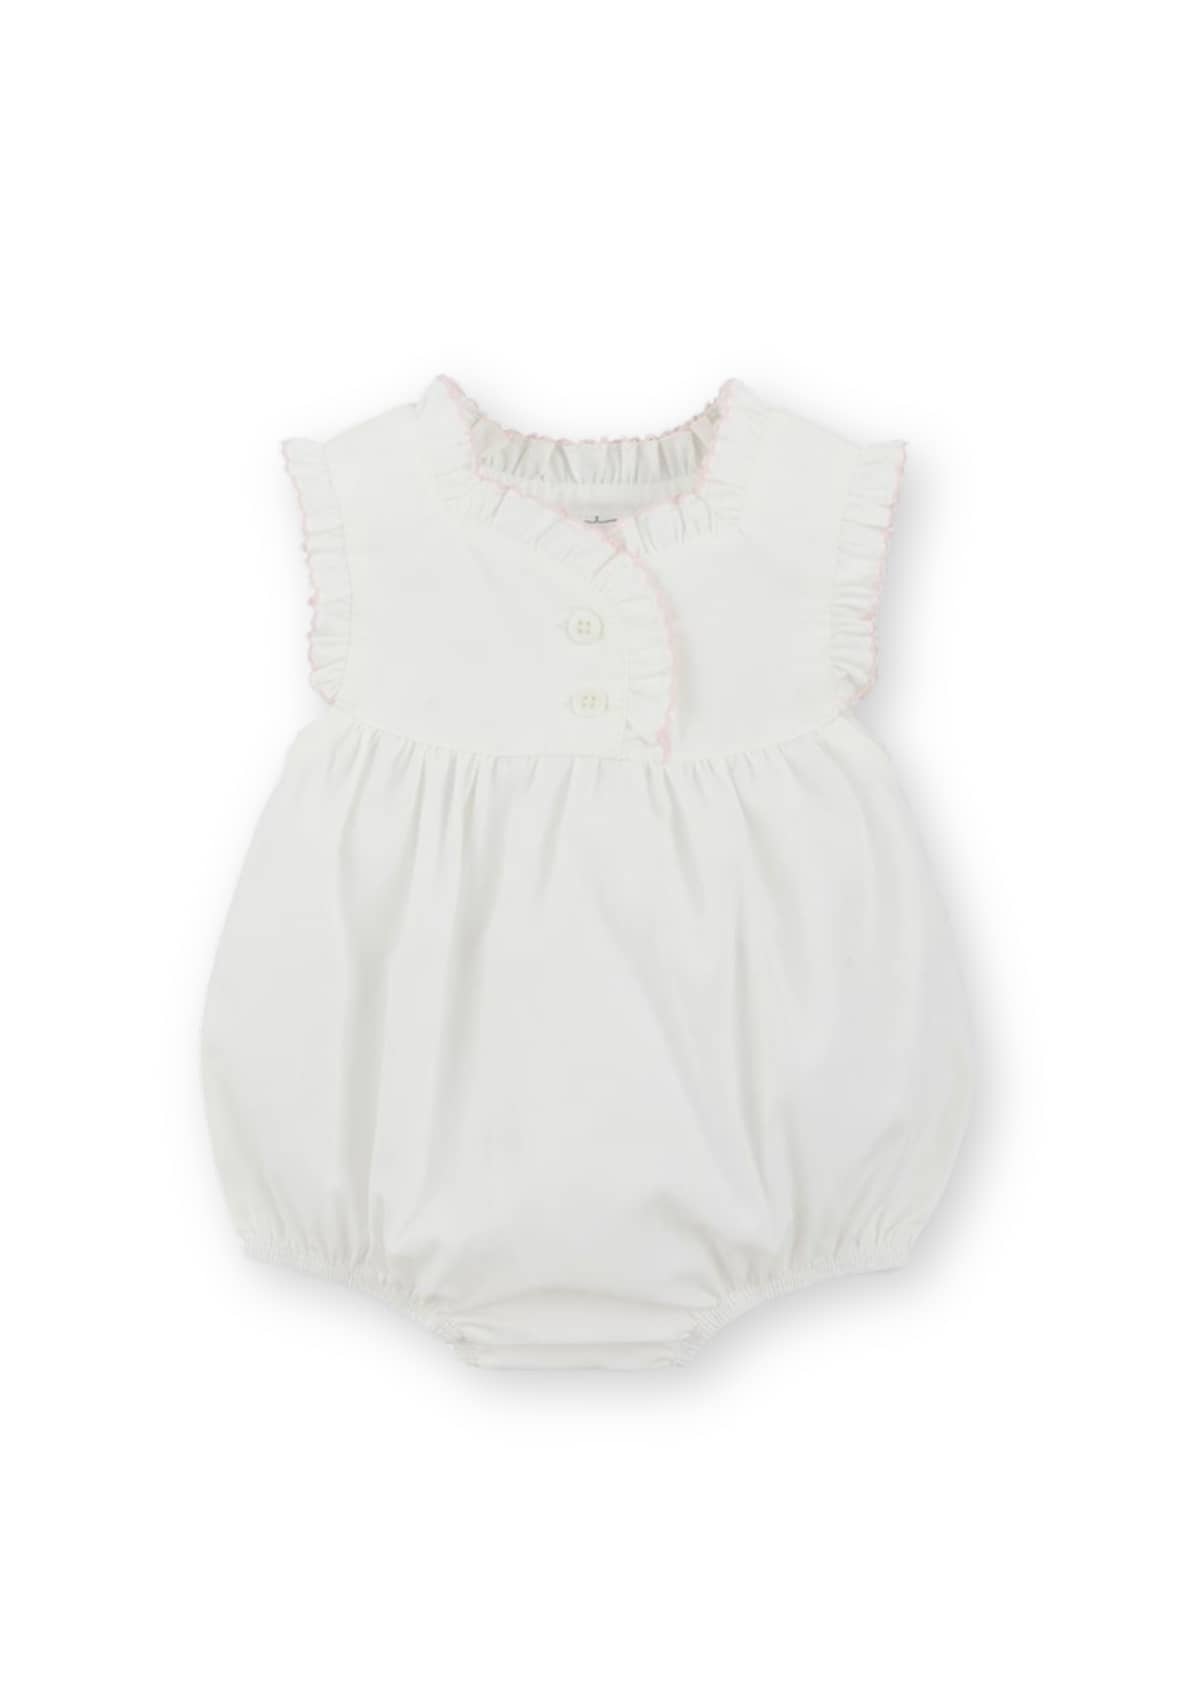 Baby-Clothing For the Littles-New Clothing For the Littles-Ruby Jane.